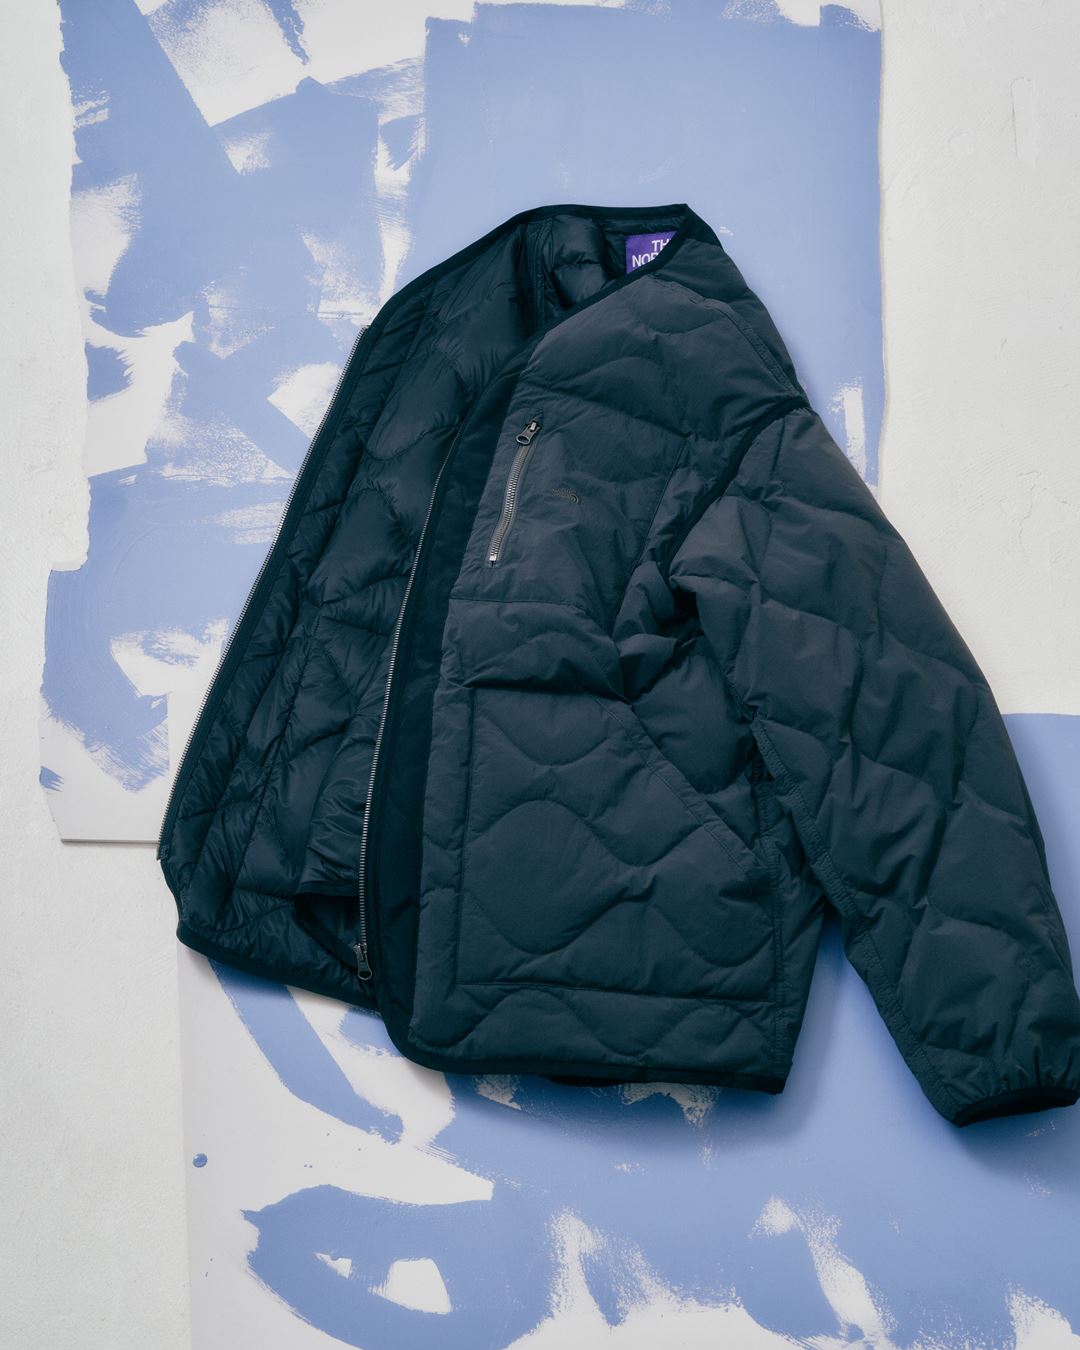 nanamica / THE NORTH FACE PURPLE LABEL / Featured Product vol.15